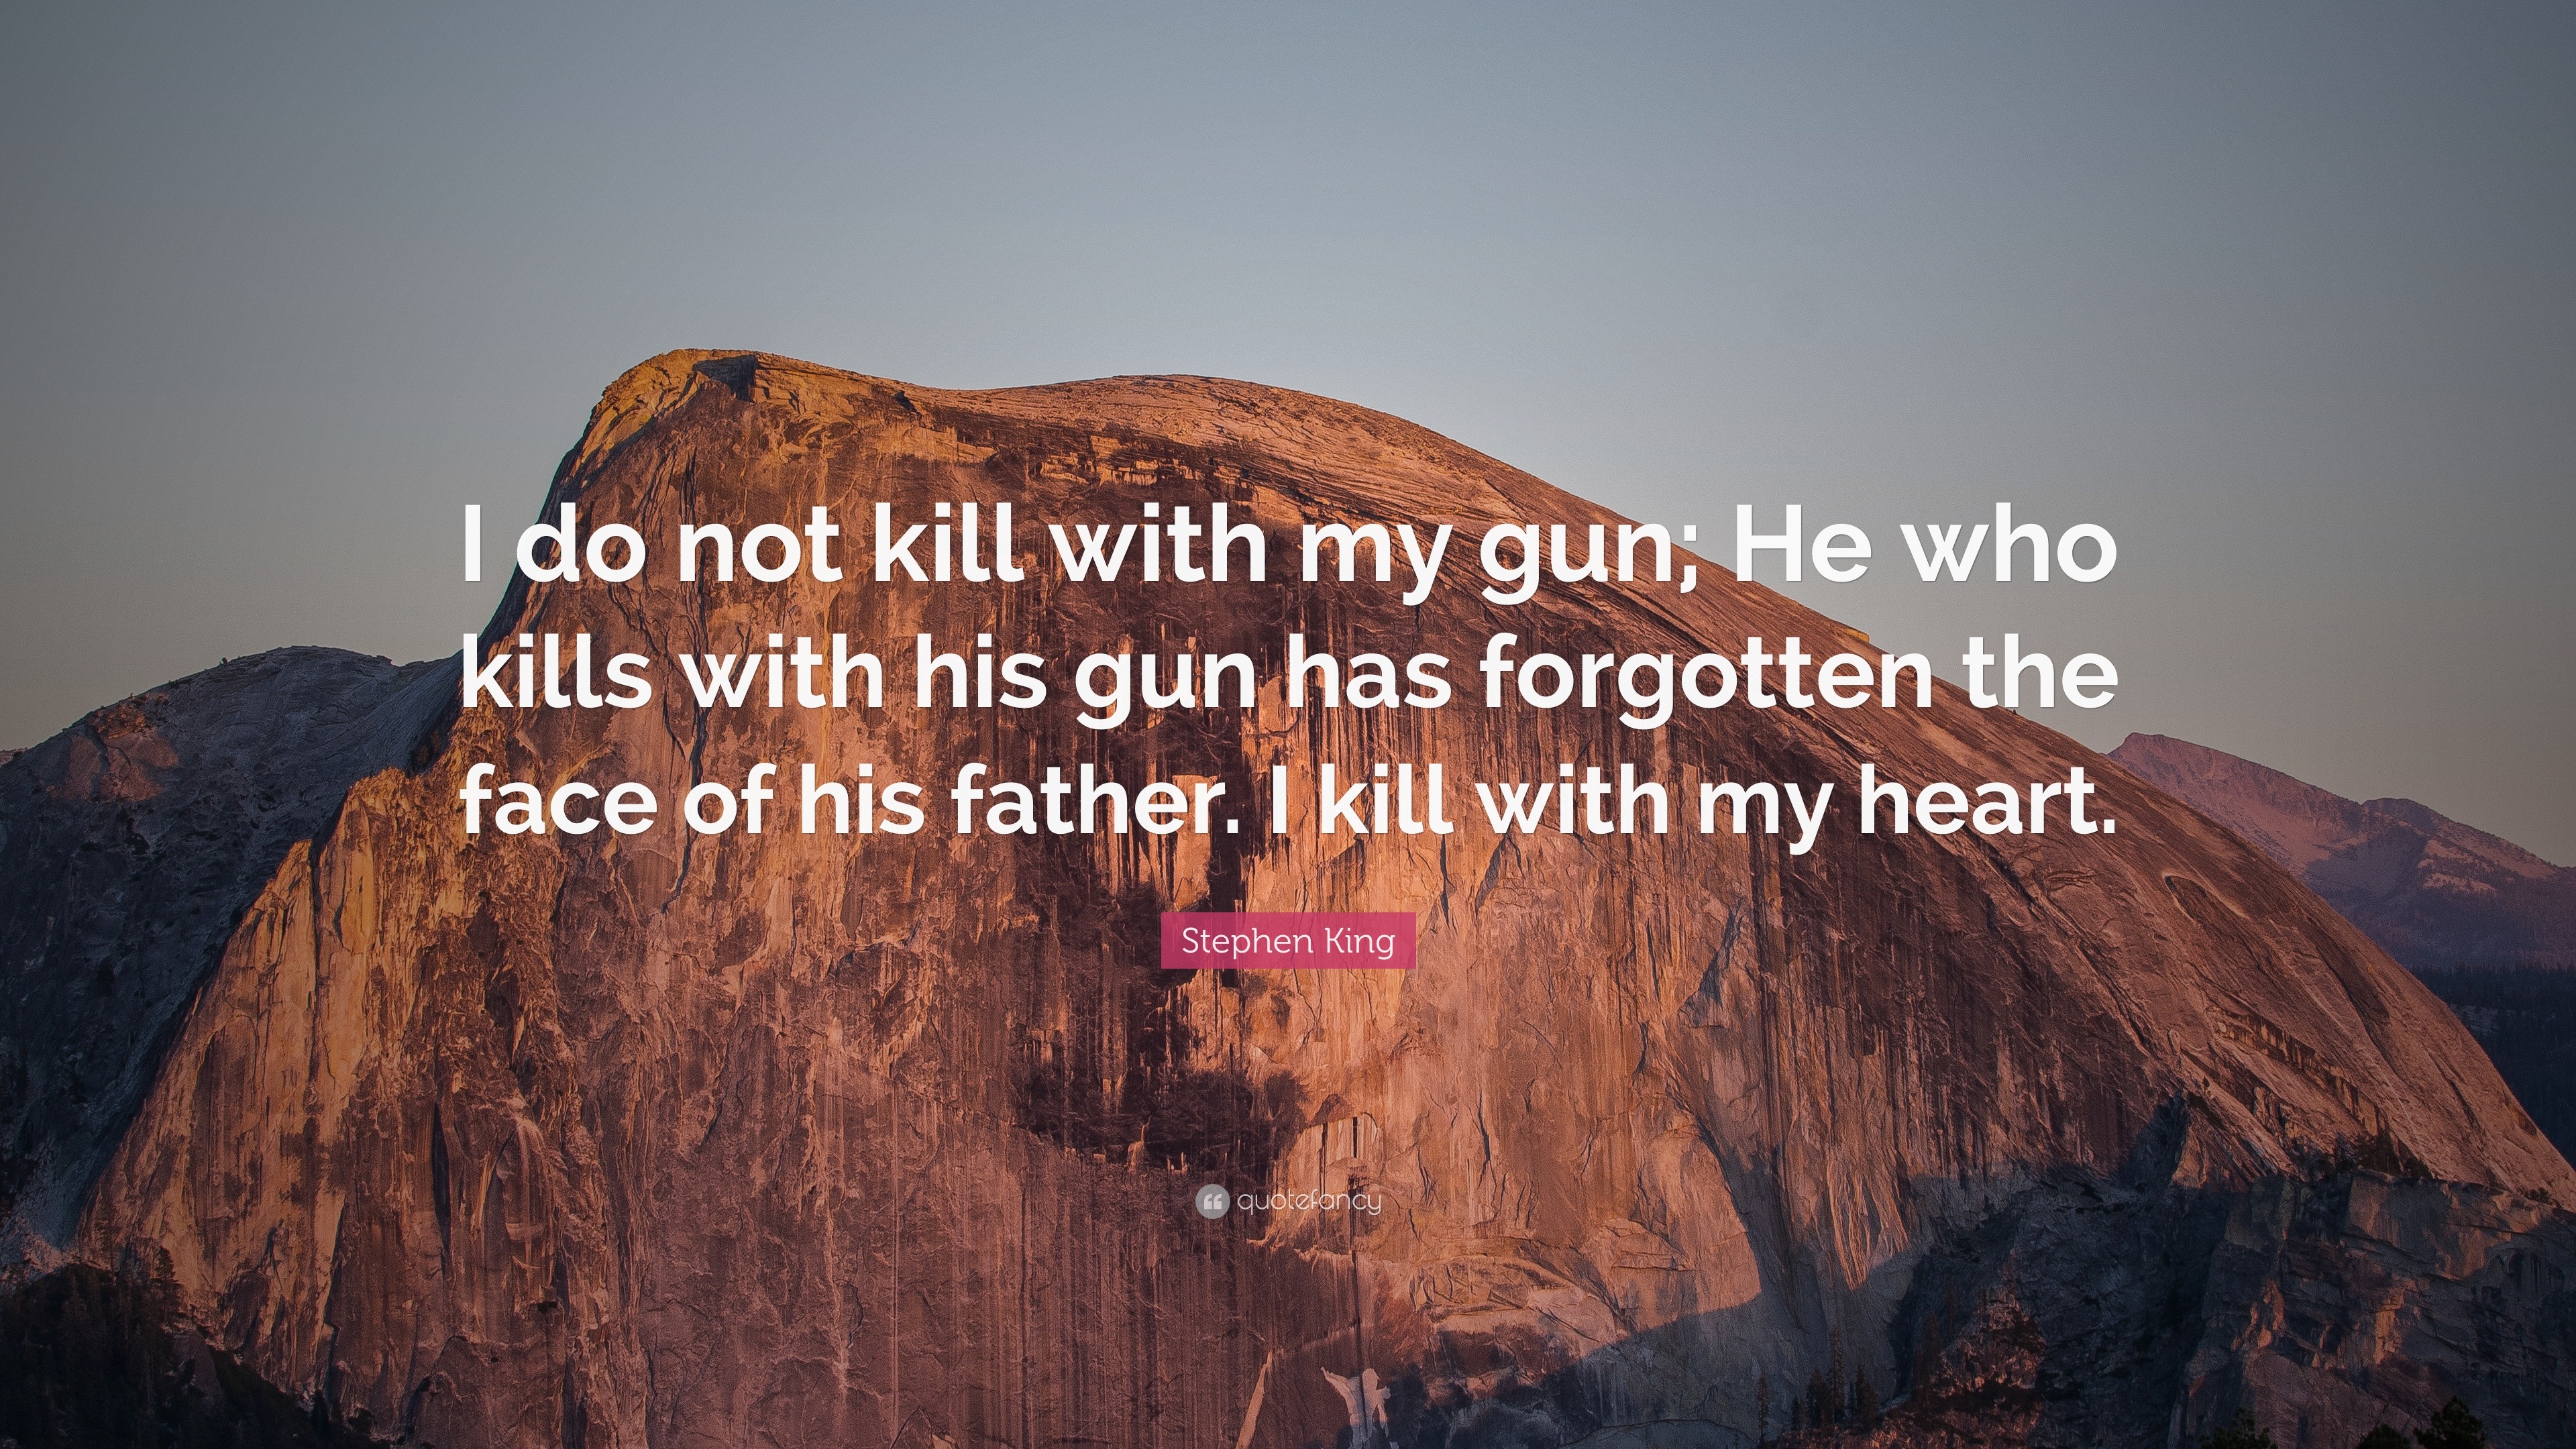 Stephen King Quote: "I do not kill with my gun; He who ...